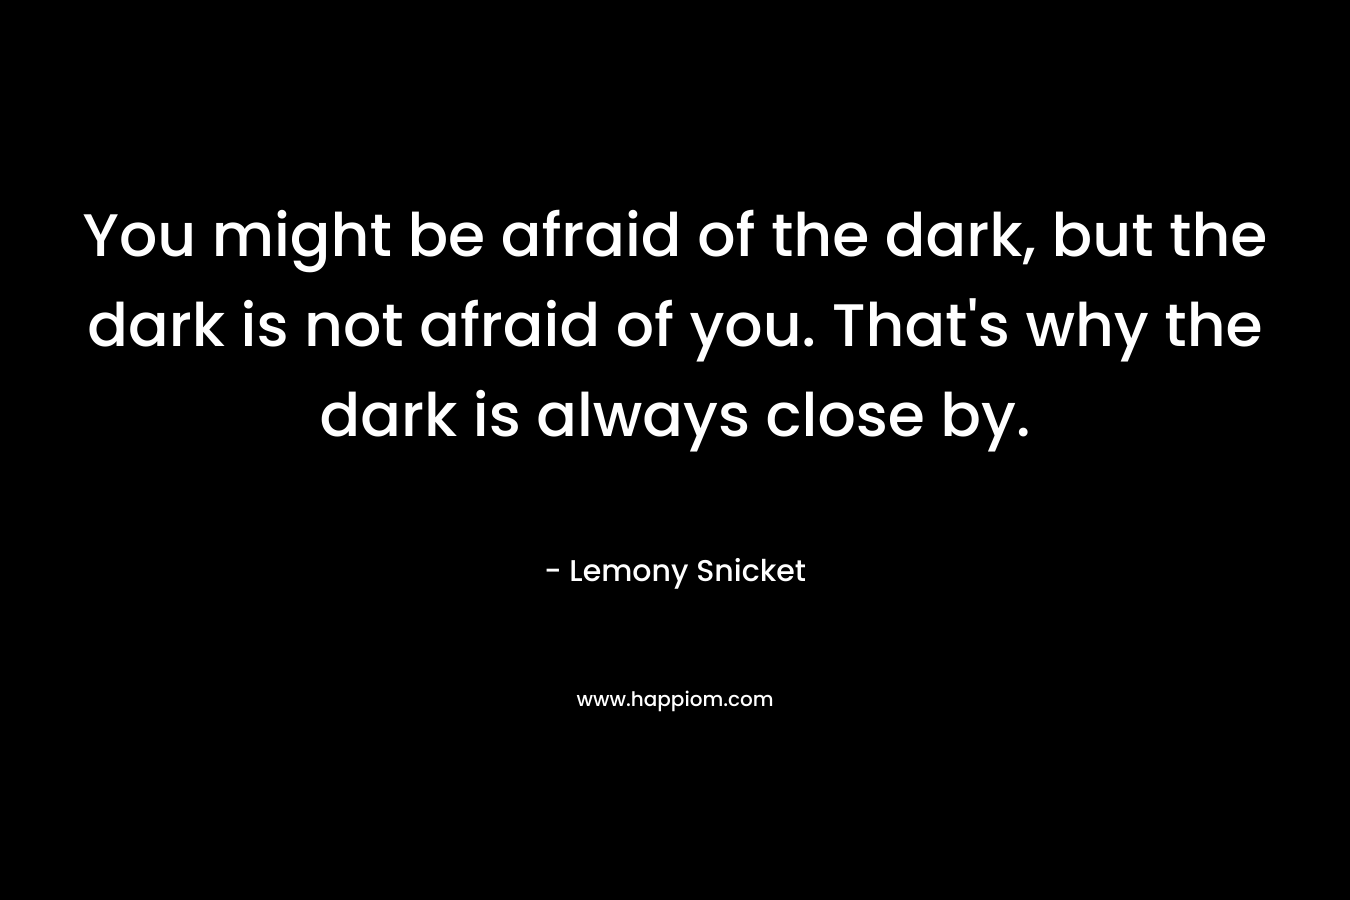 You might be afraid of the dark, but the dark is not afraid of you. That's why the dark is always close by.